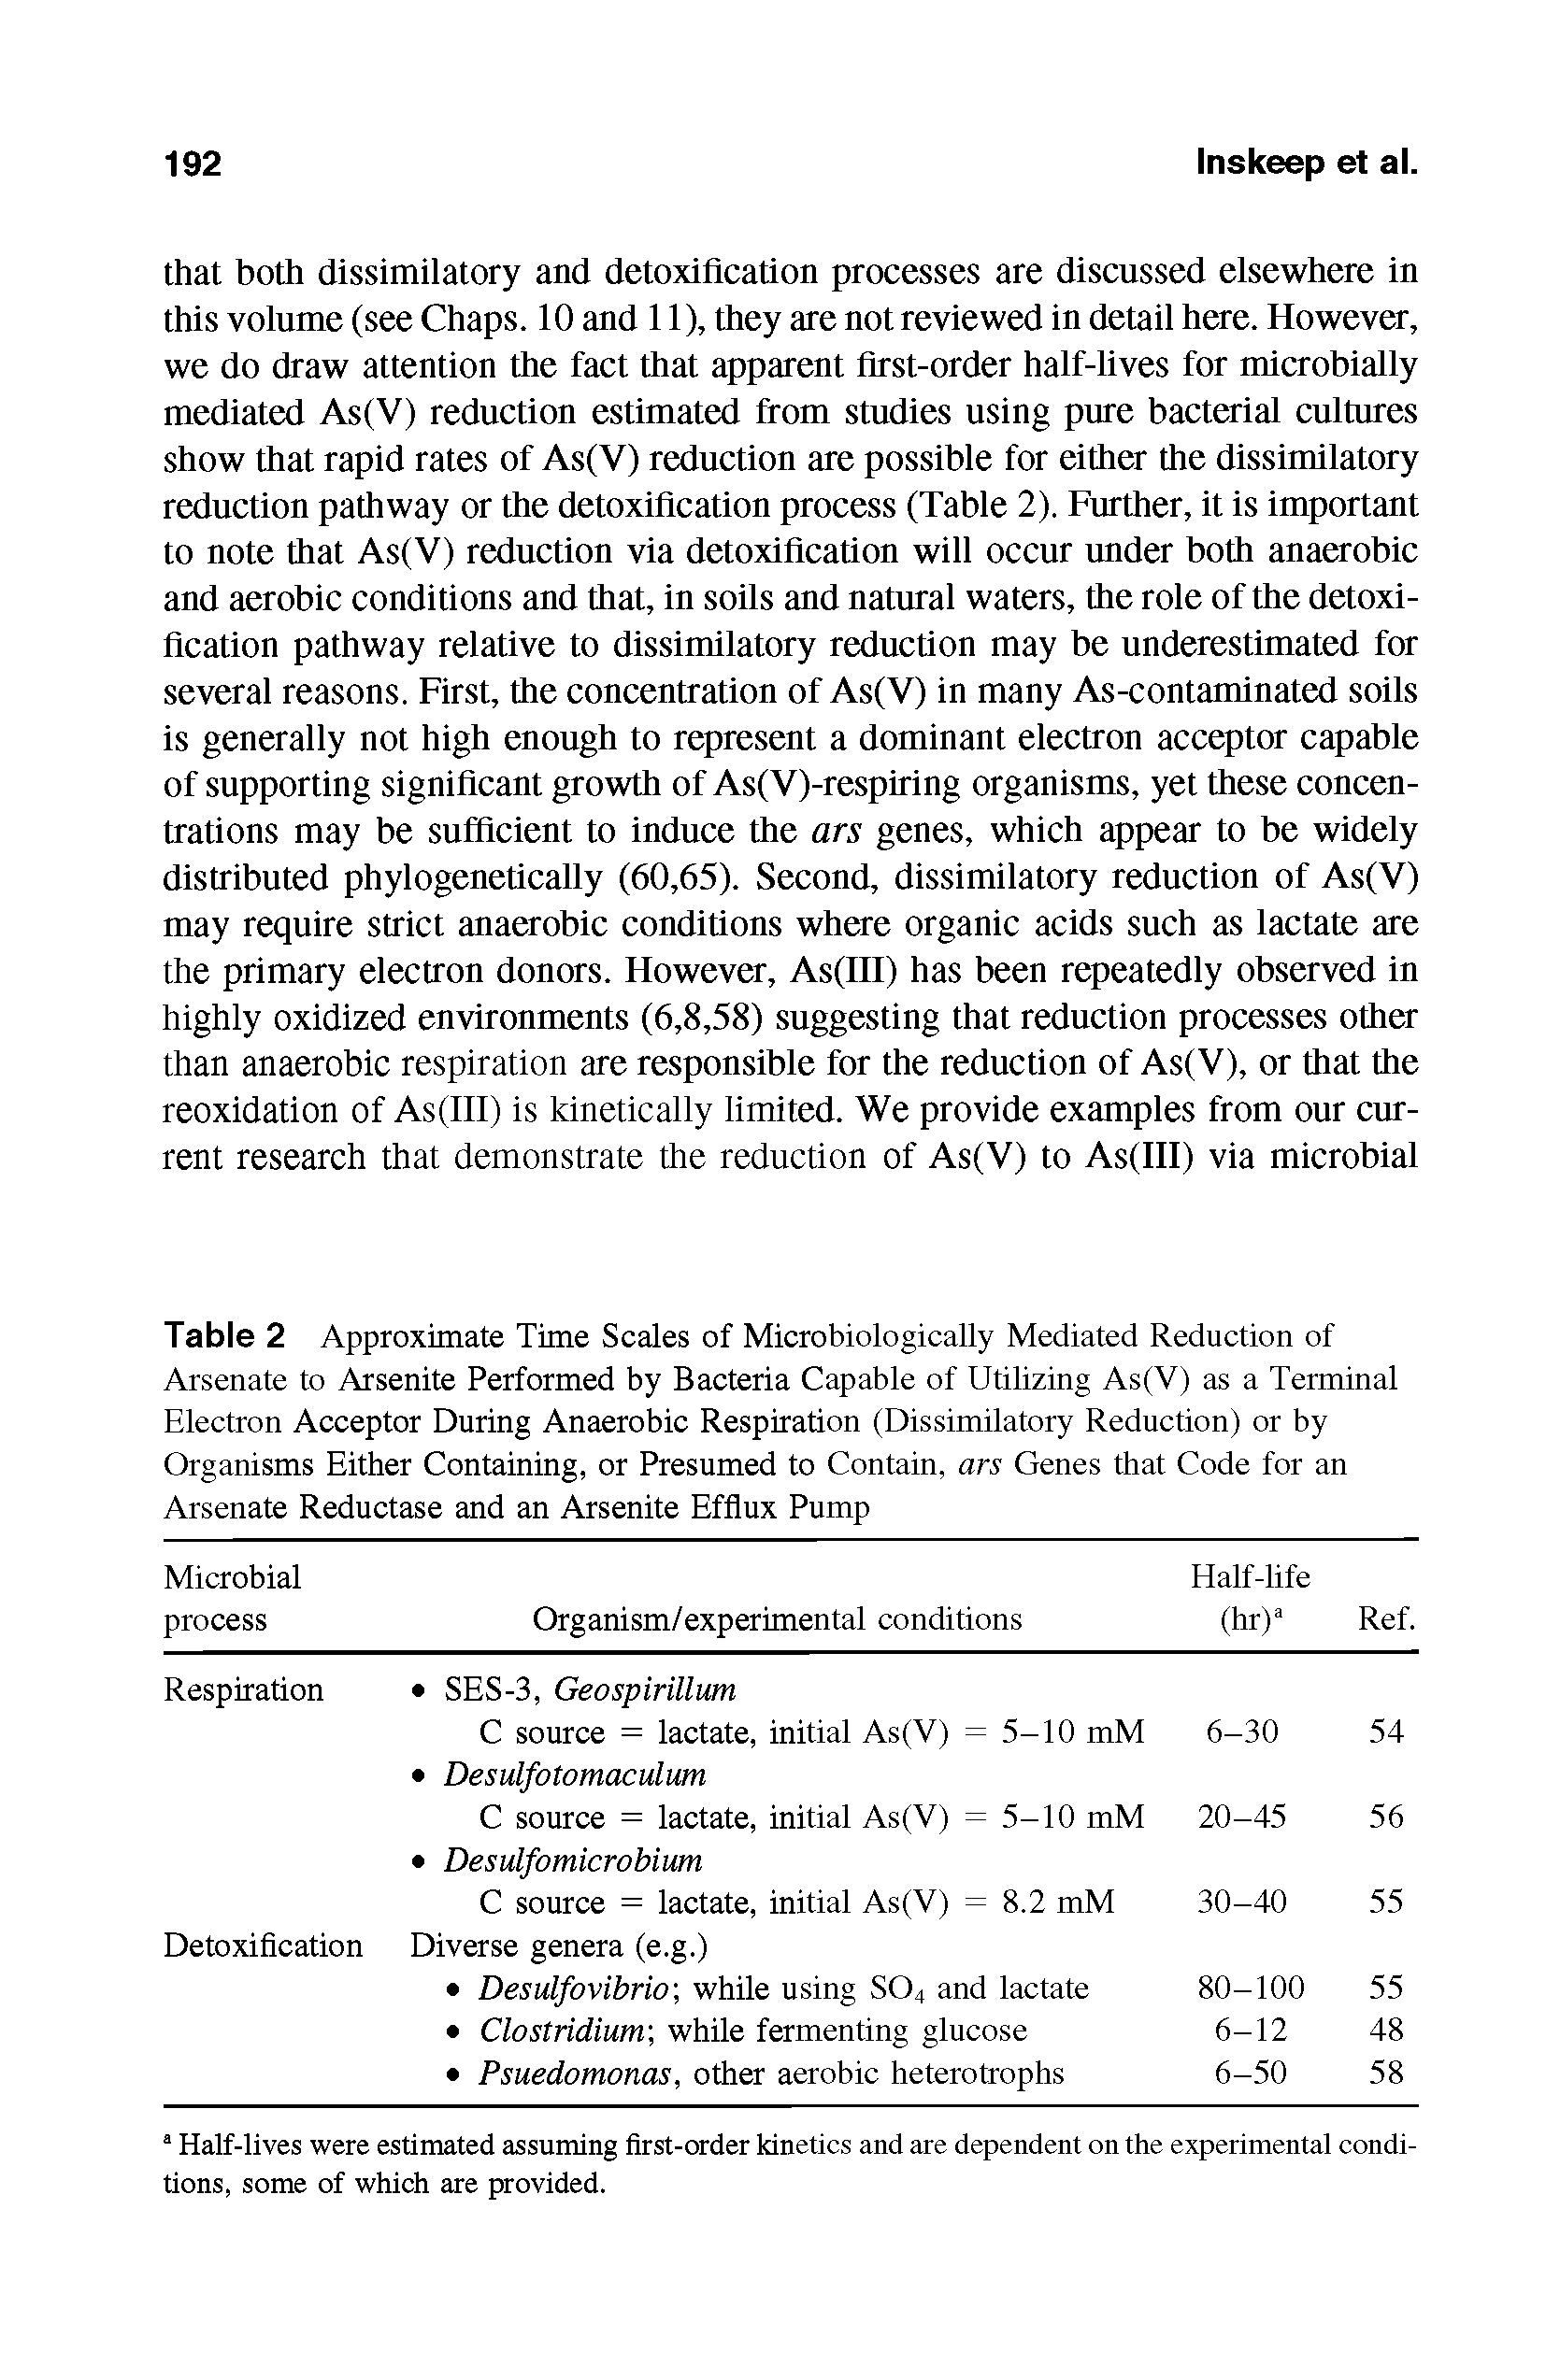 Table 2 Approximate Time Scales of Microbiologically Mediated Reduction of Arsenate to Arsenite Performed by Bacteria Capable of Utilizing As(V) as a Terminal Electron Acceptor During Anaerobic Respiration (Dissimilatory Reduction) or by Organisms Either Containing, or Presumed to Contain, ars Genes that Code for an Arsenate Reductase and an Arsenite Efflux Pump...